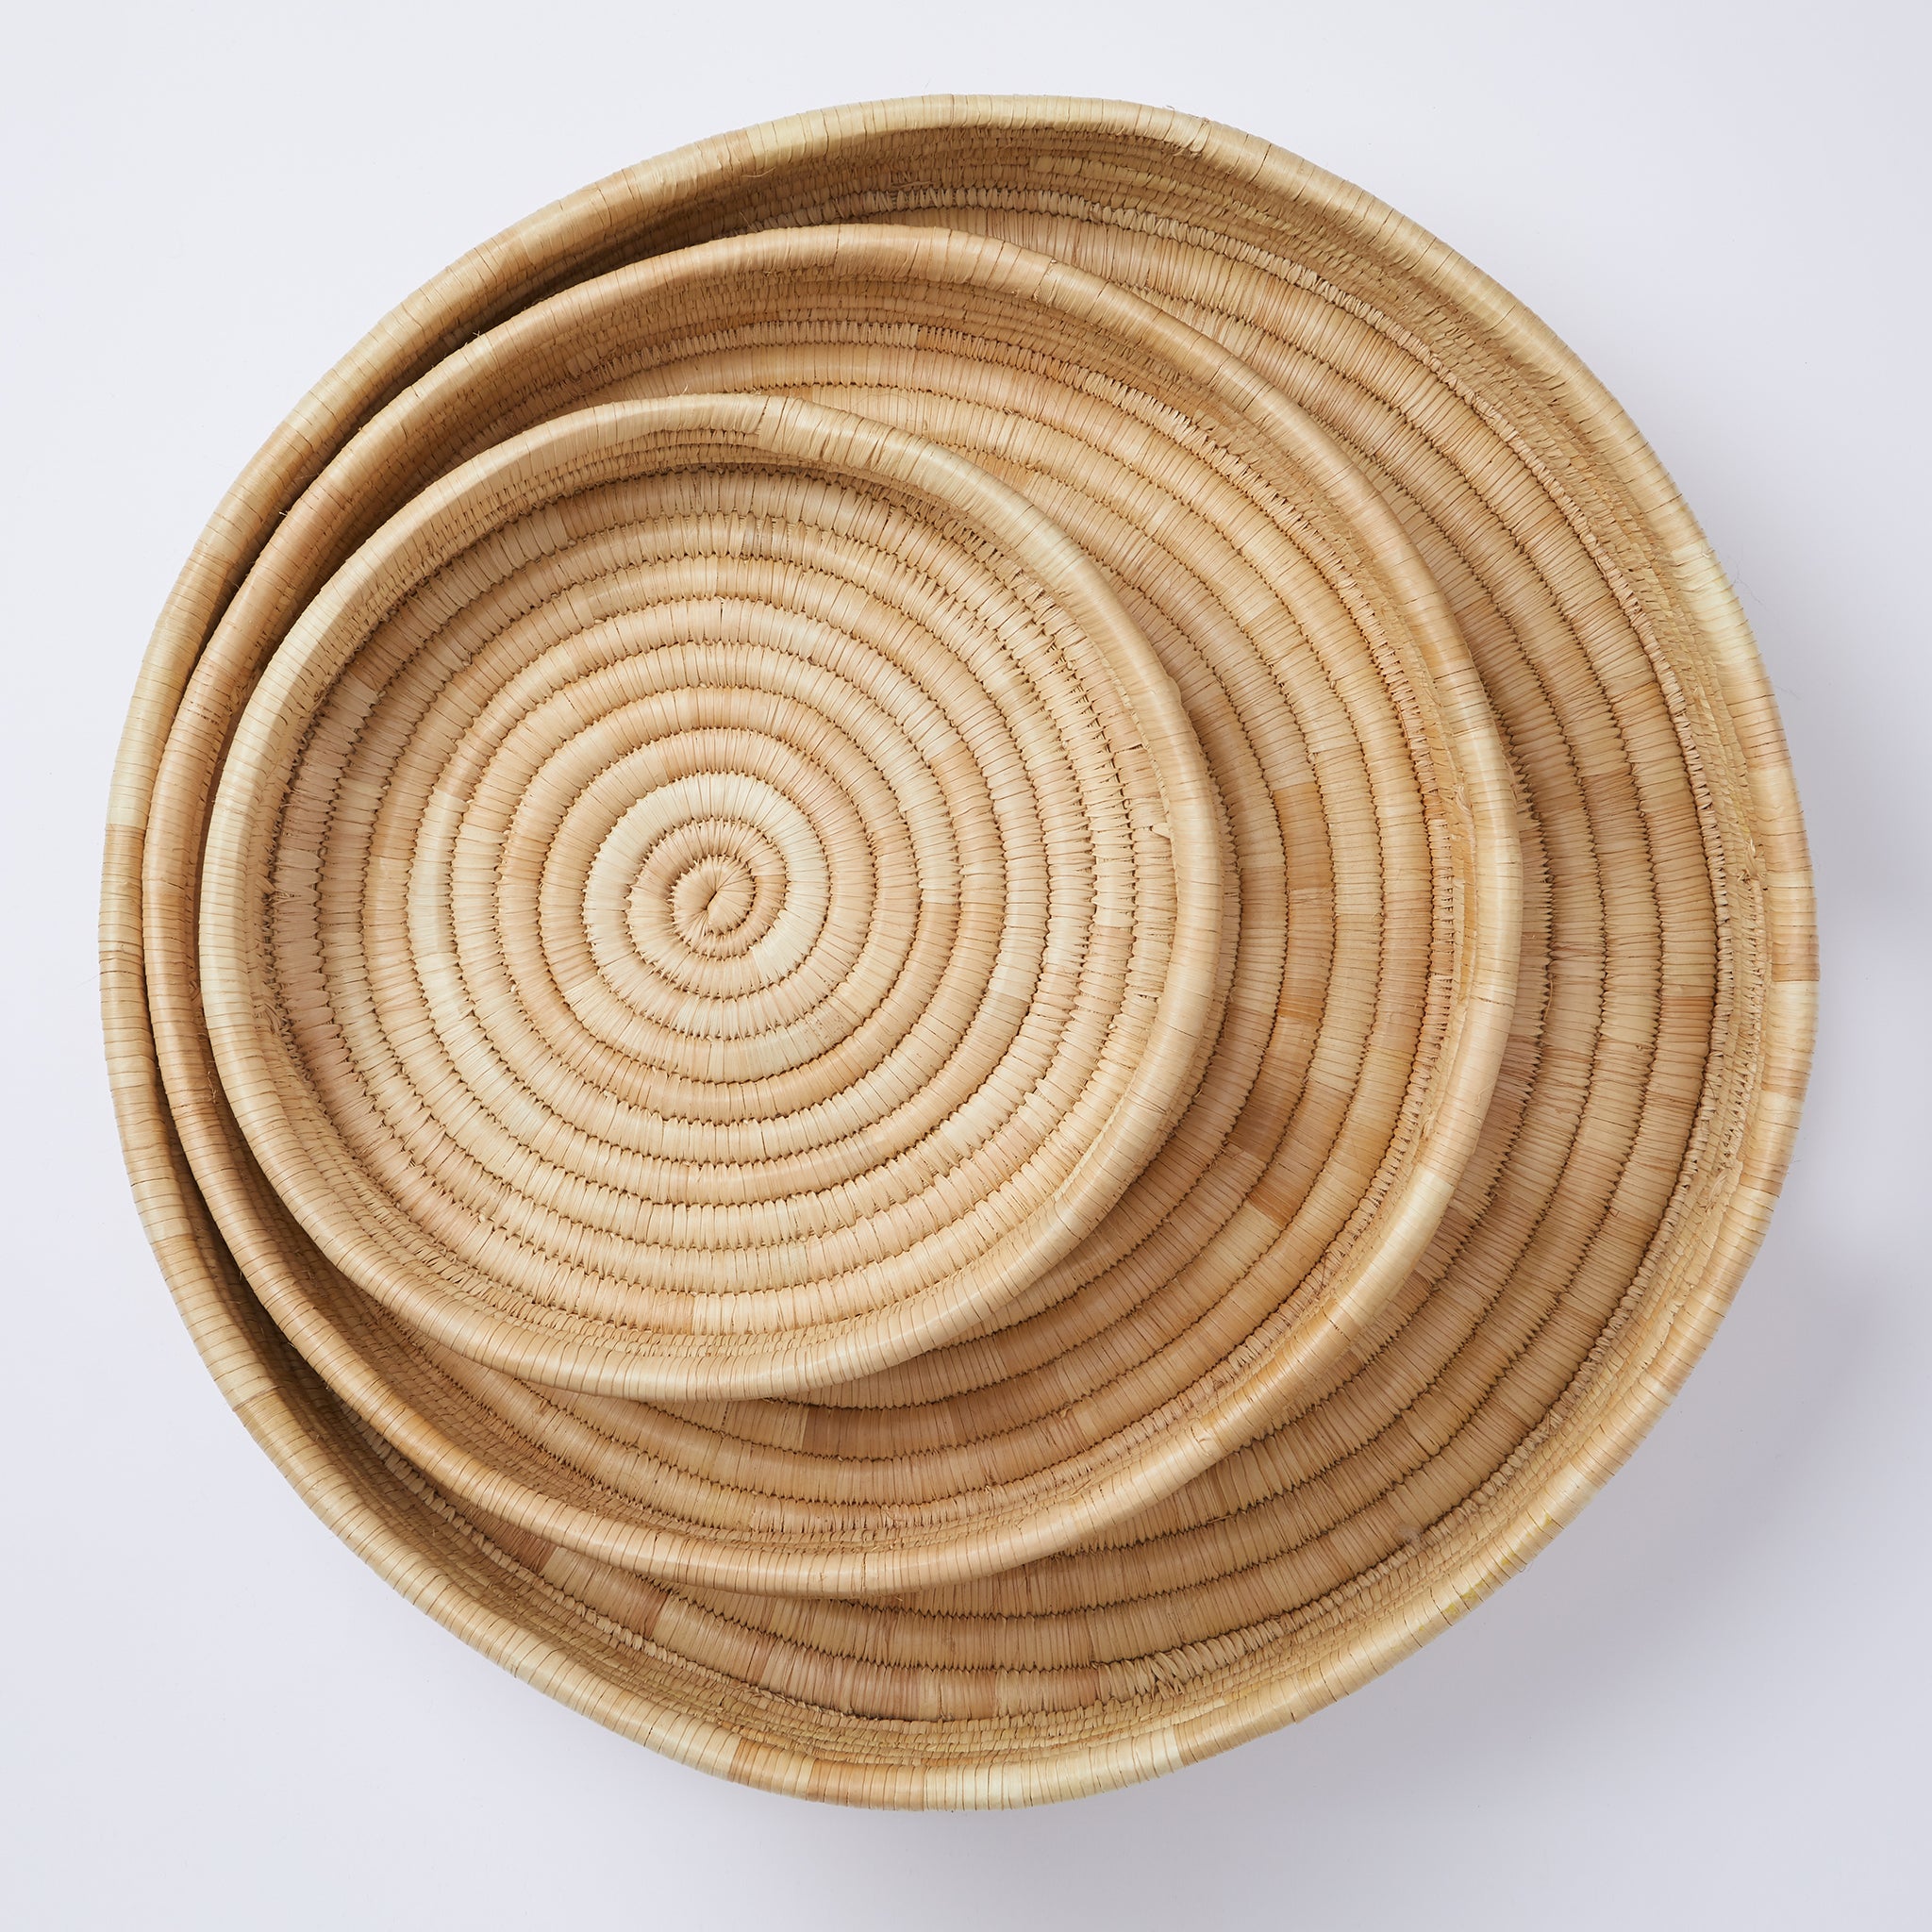 Umi tray in a set. A casual all-rounder for your home.   